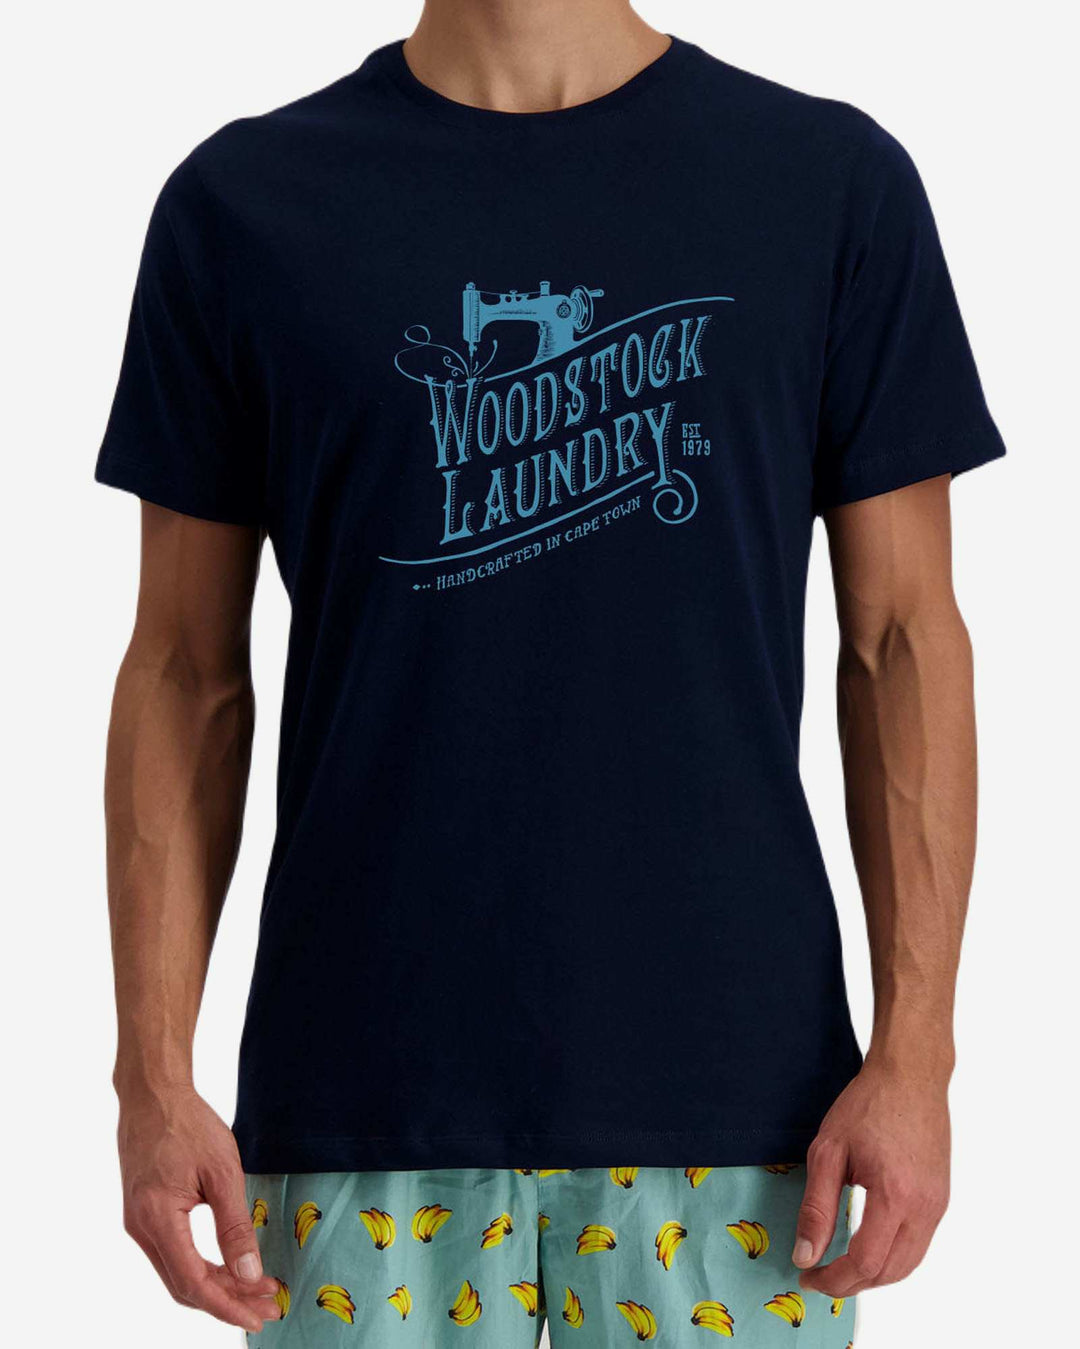 Mens navy t-shirts with blue logo